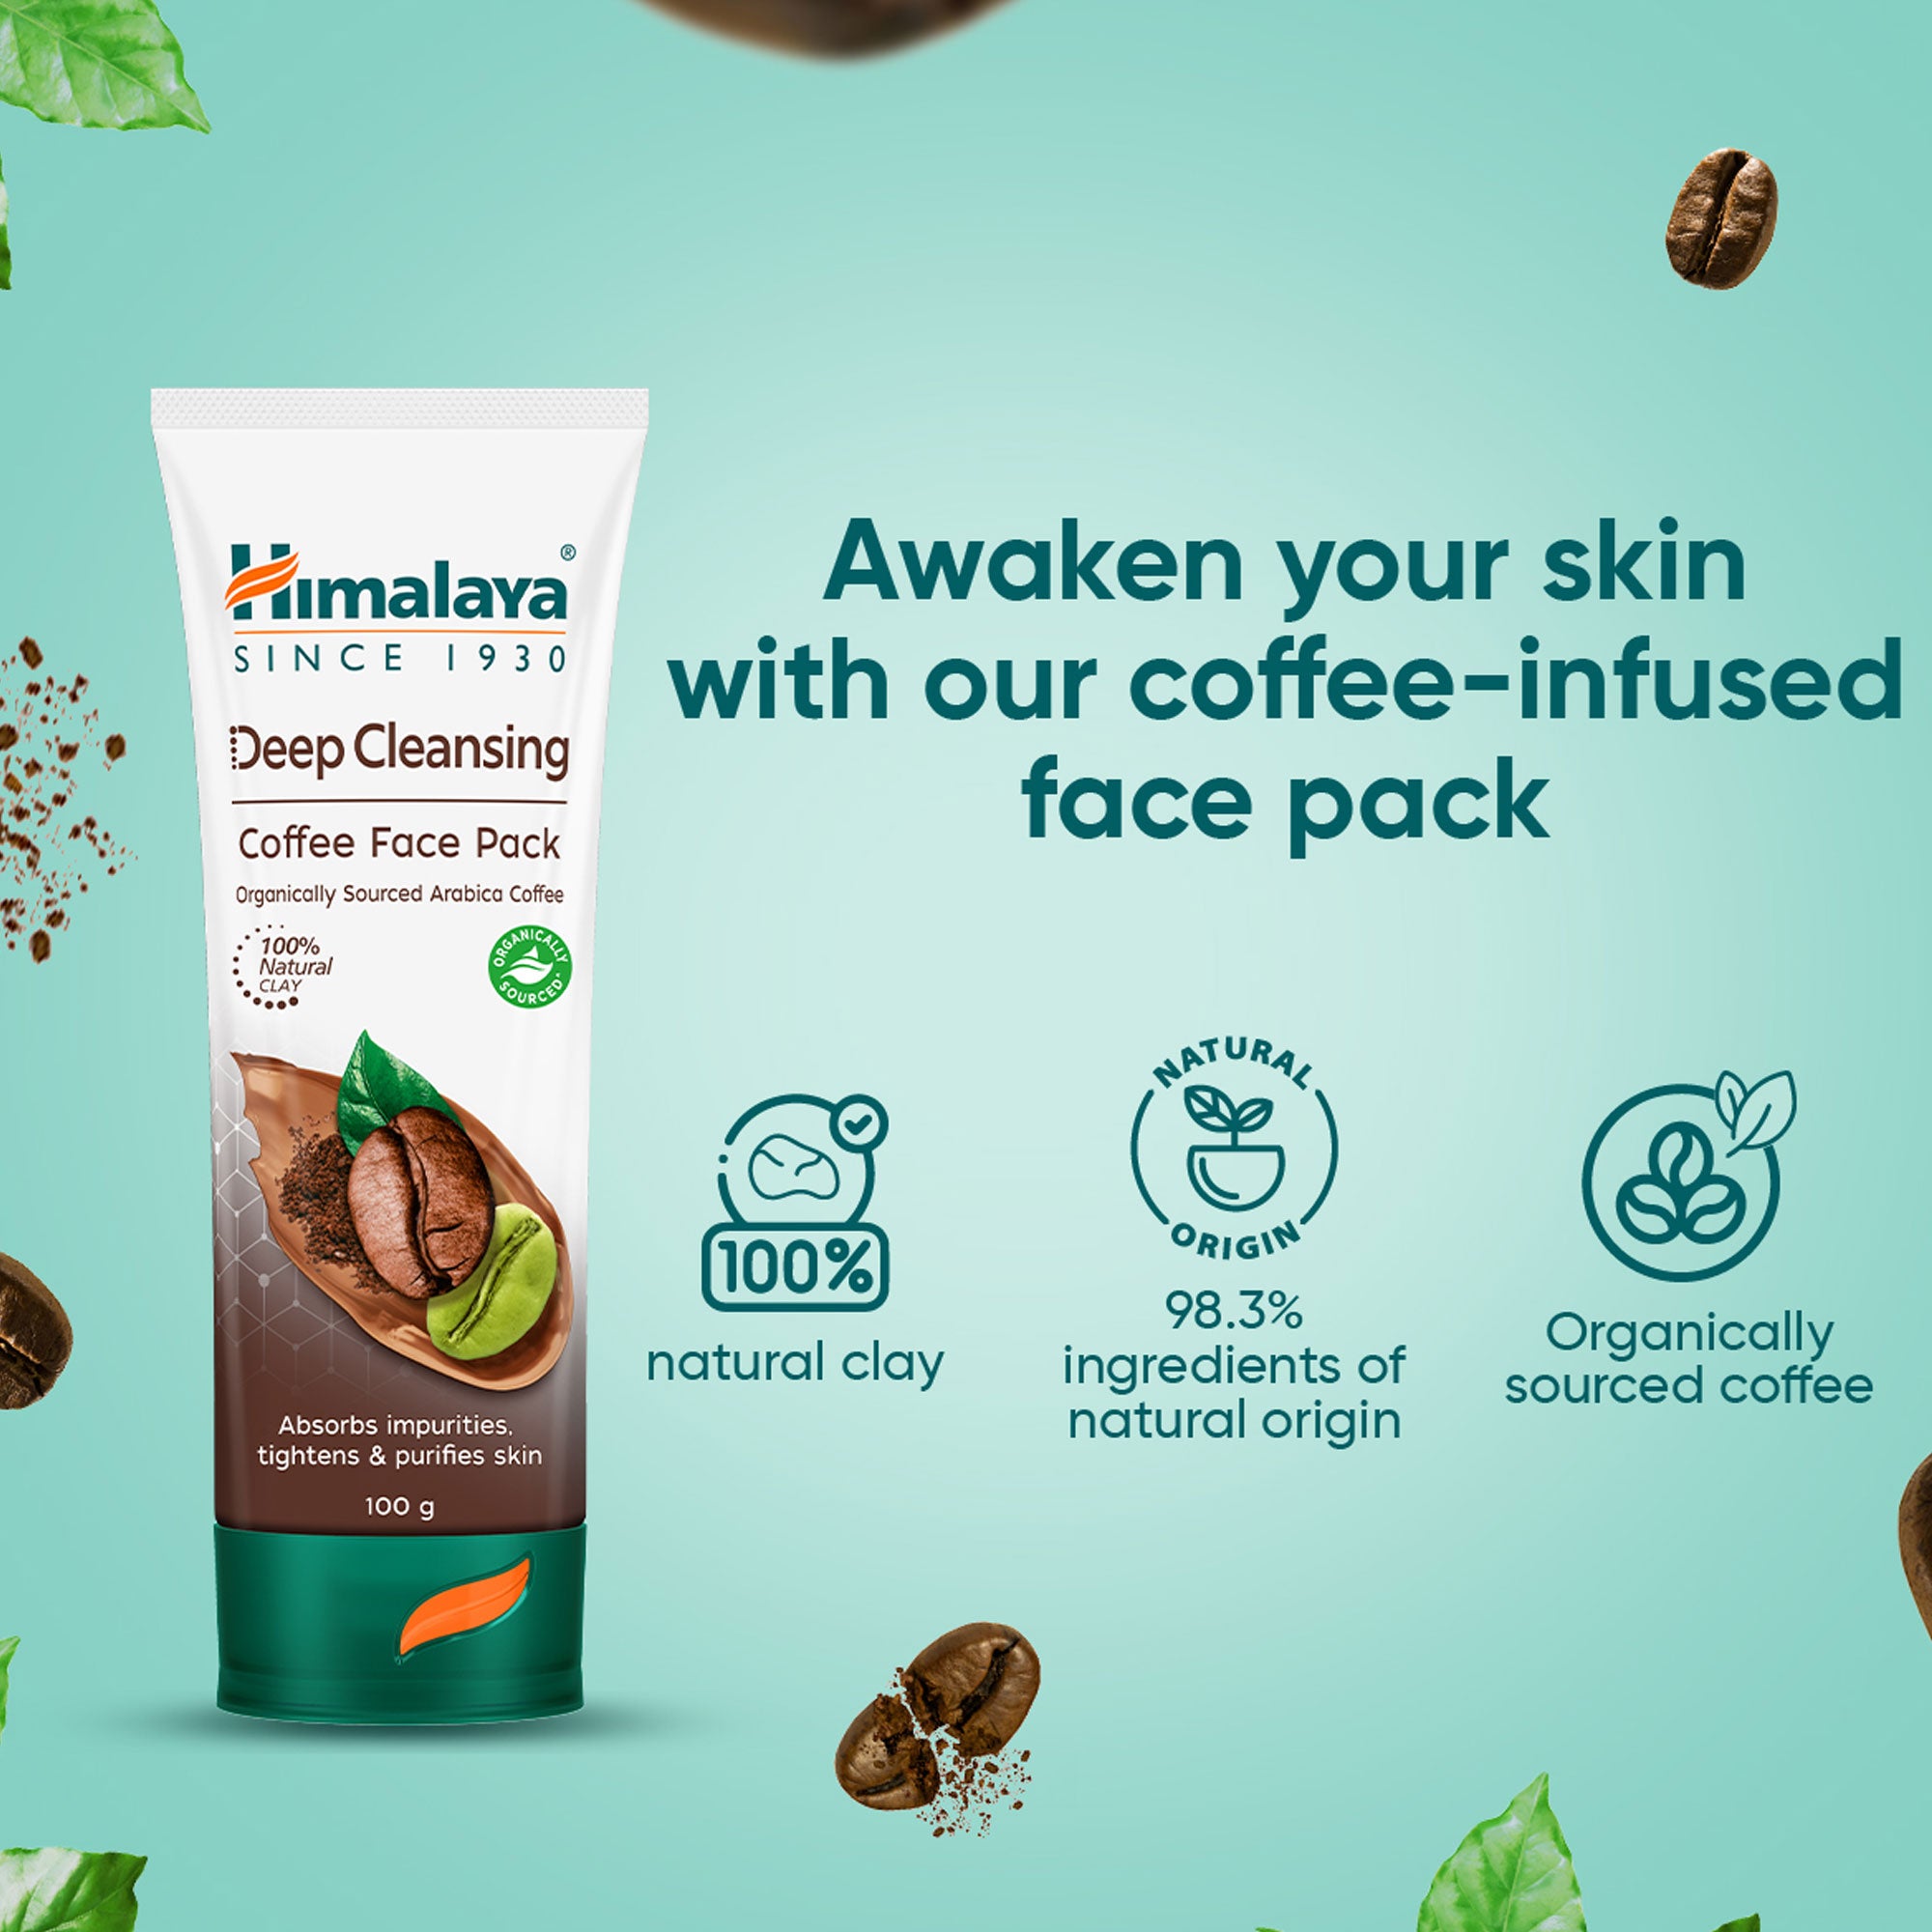 Himalaya Deep Cleansing Coffee Face Pack 100g - 100% Natural Clay